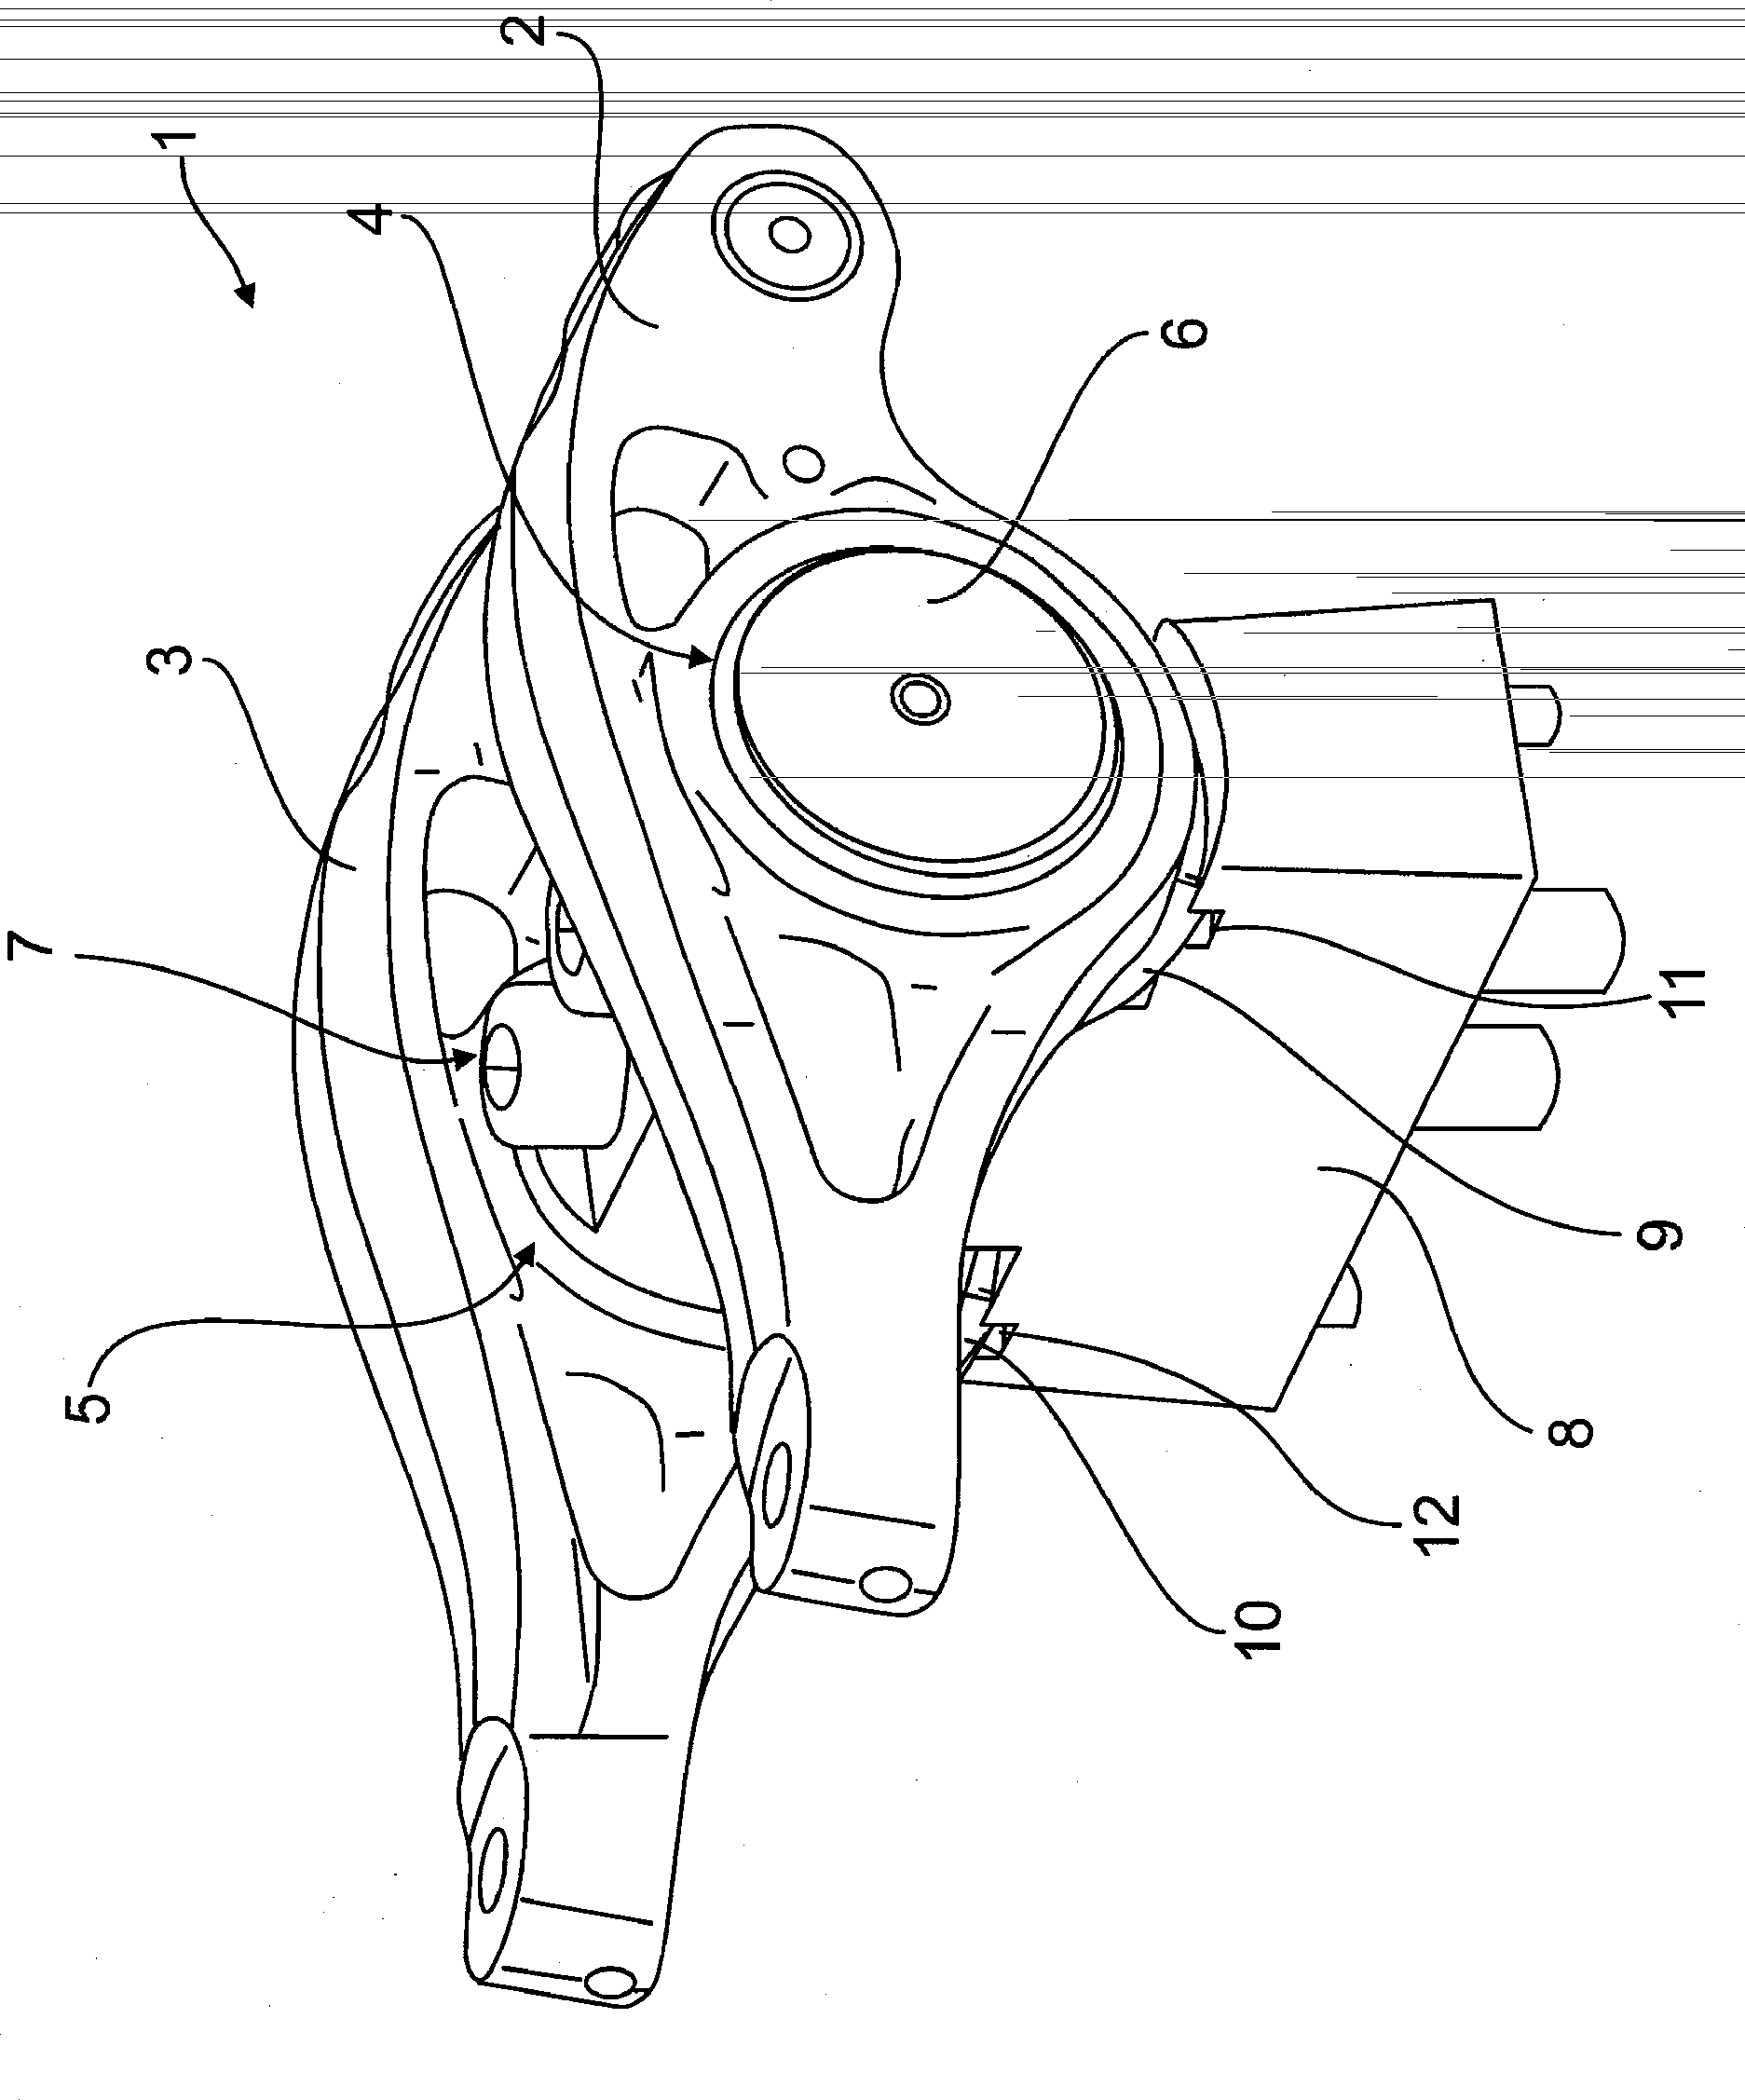 Bearing of a rocker arm for a valve train of an internal combustion engine